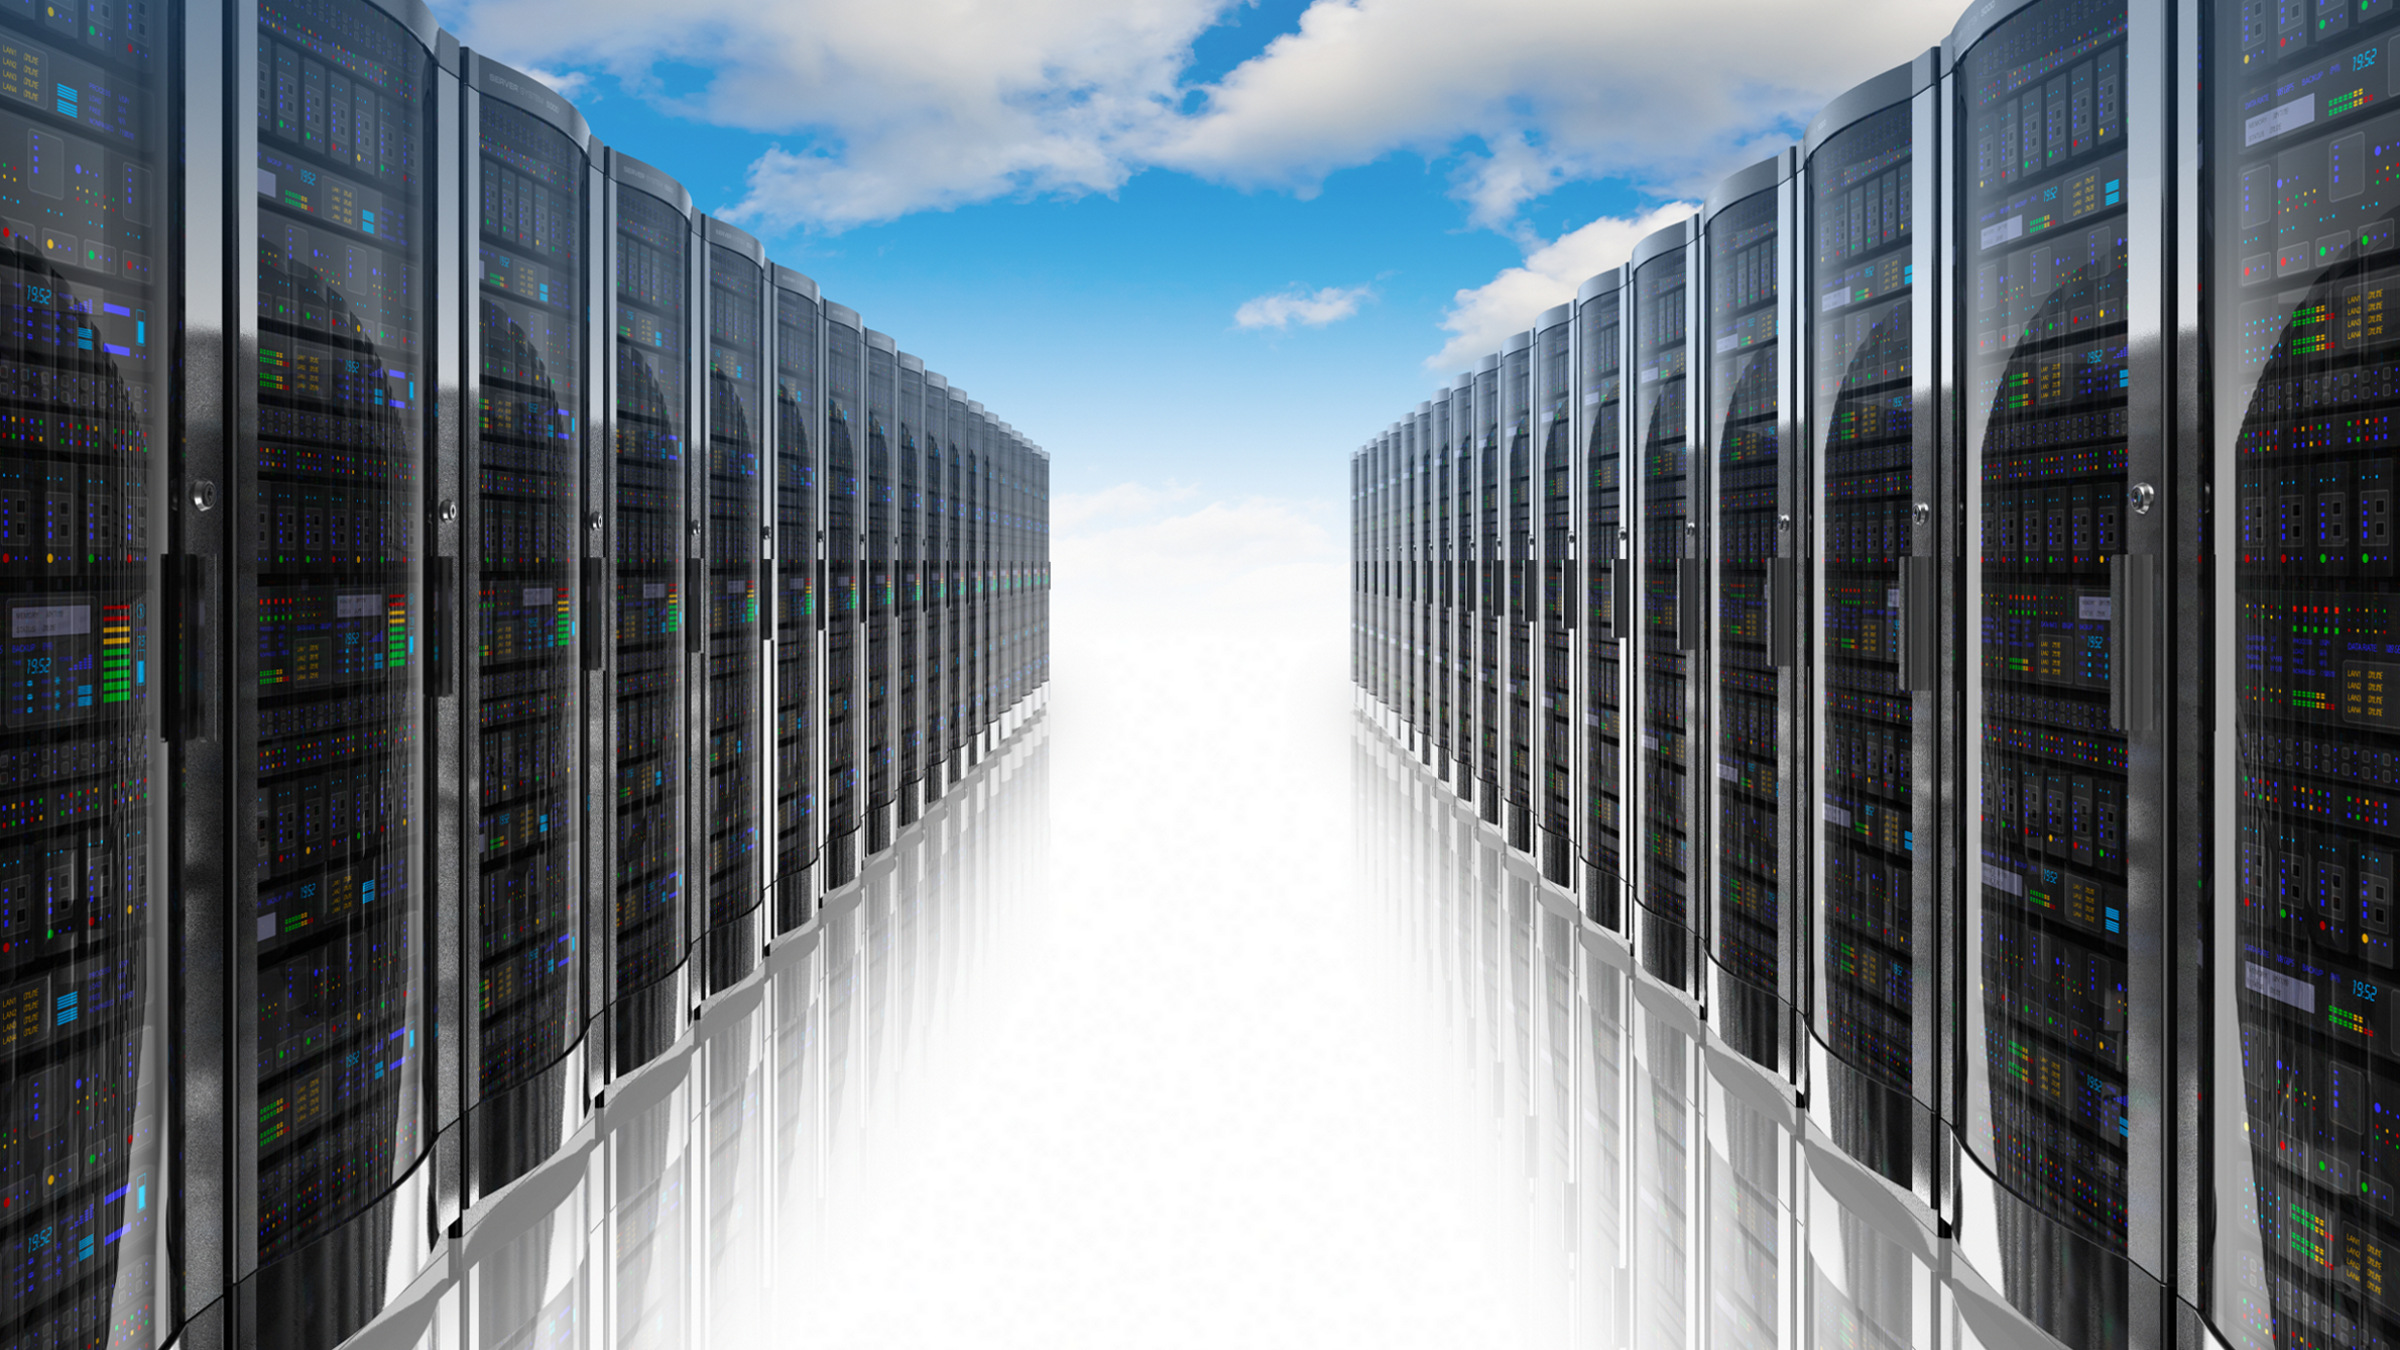 Credit: Shutterstock datacenter in the clouds, cloud-computing concept, illustration